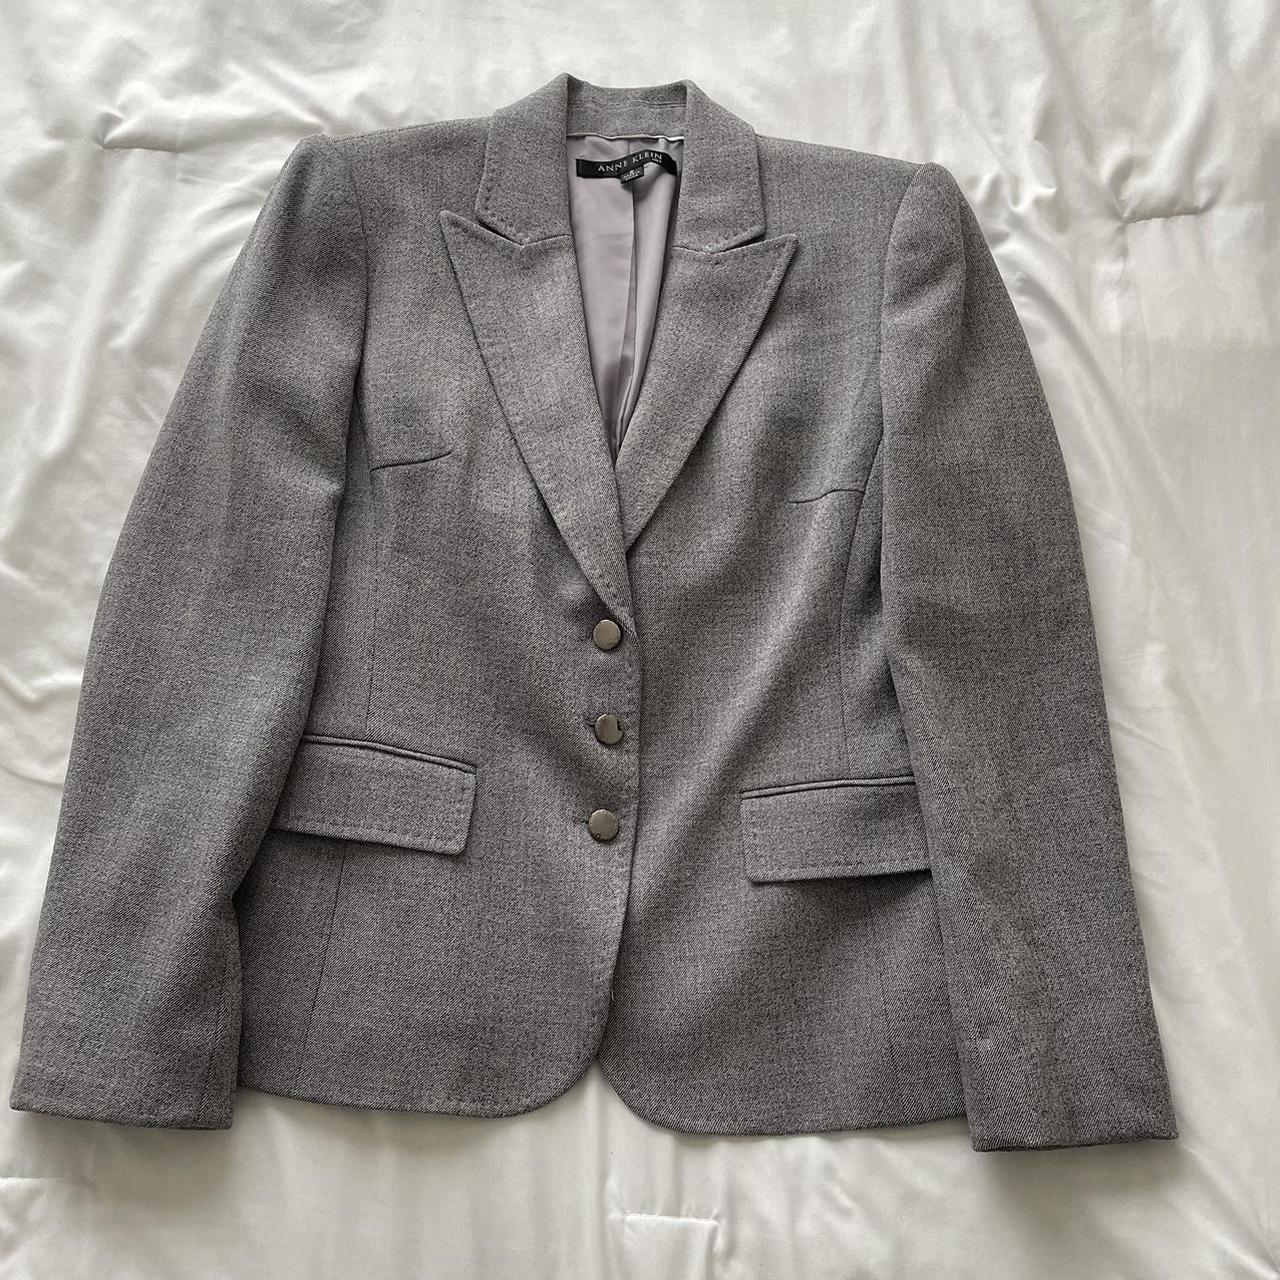 Anne Klein Women's Grey and Silver Suit (2)